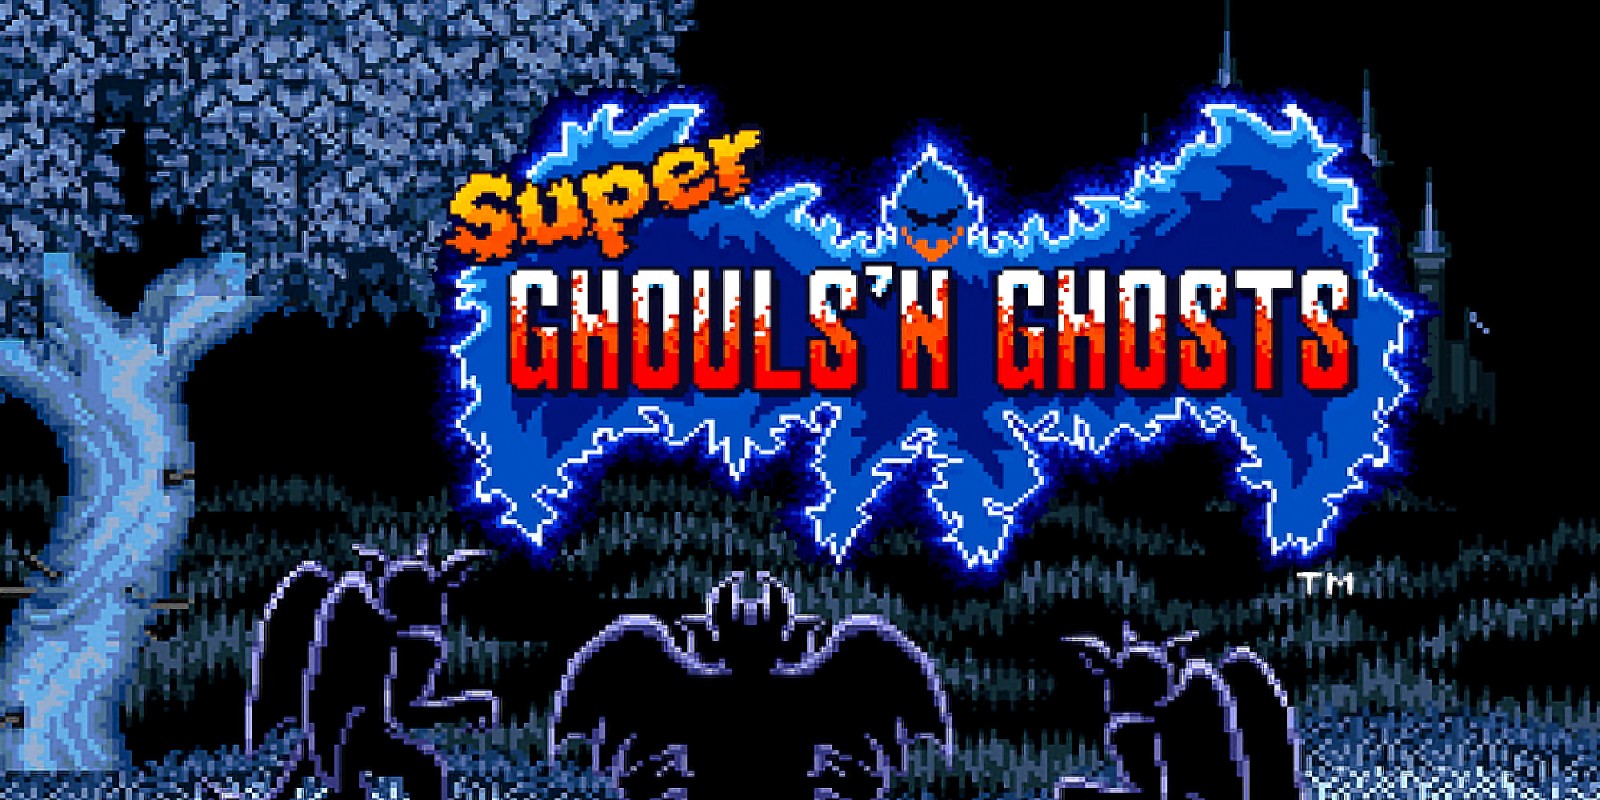 Super ghouls and ghosts download free